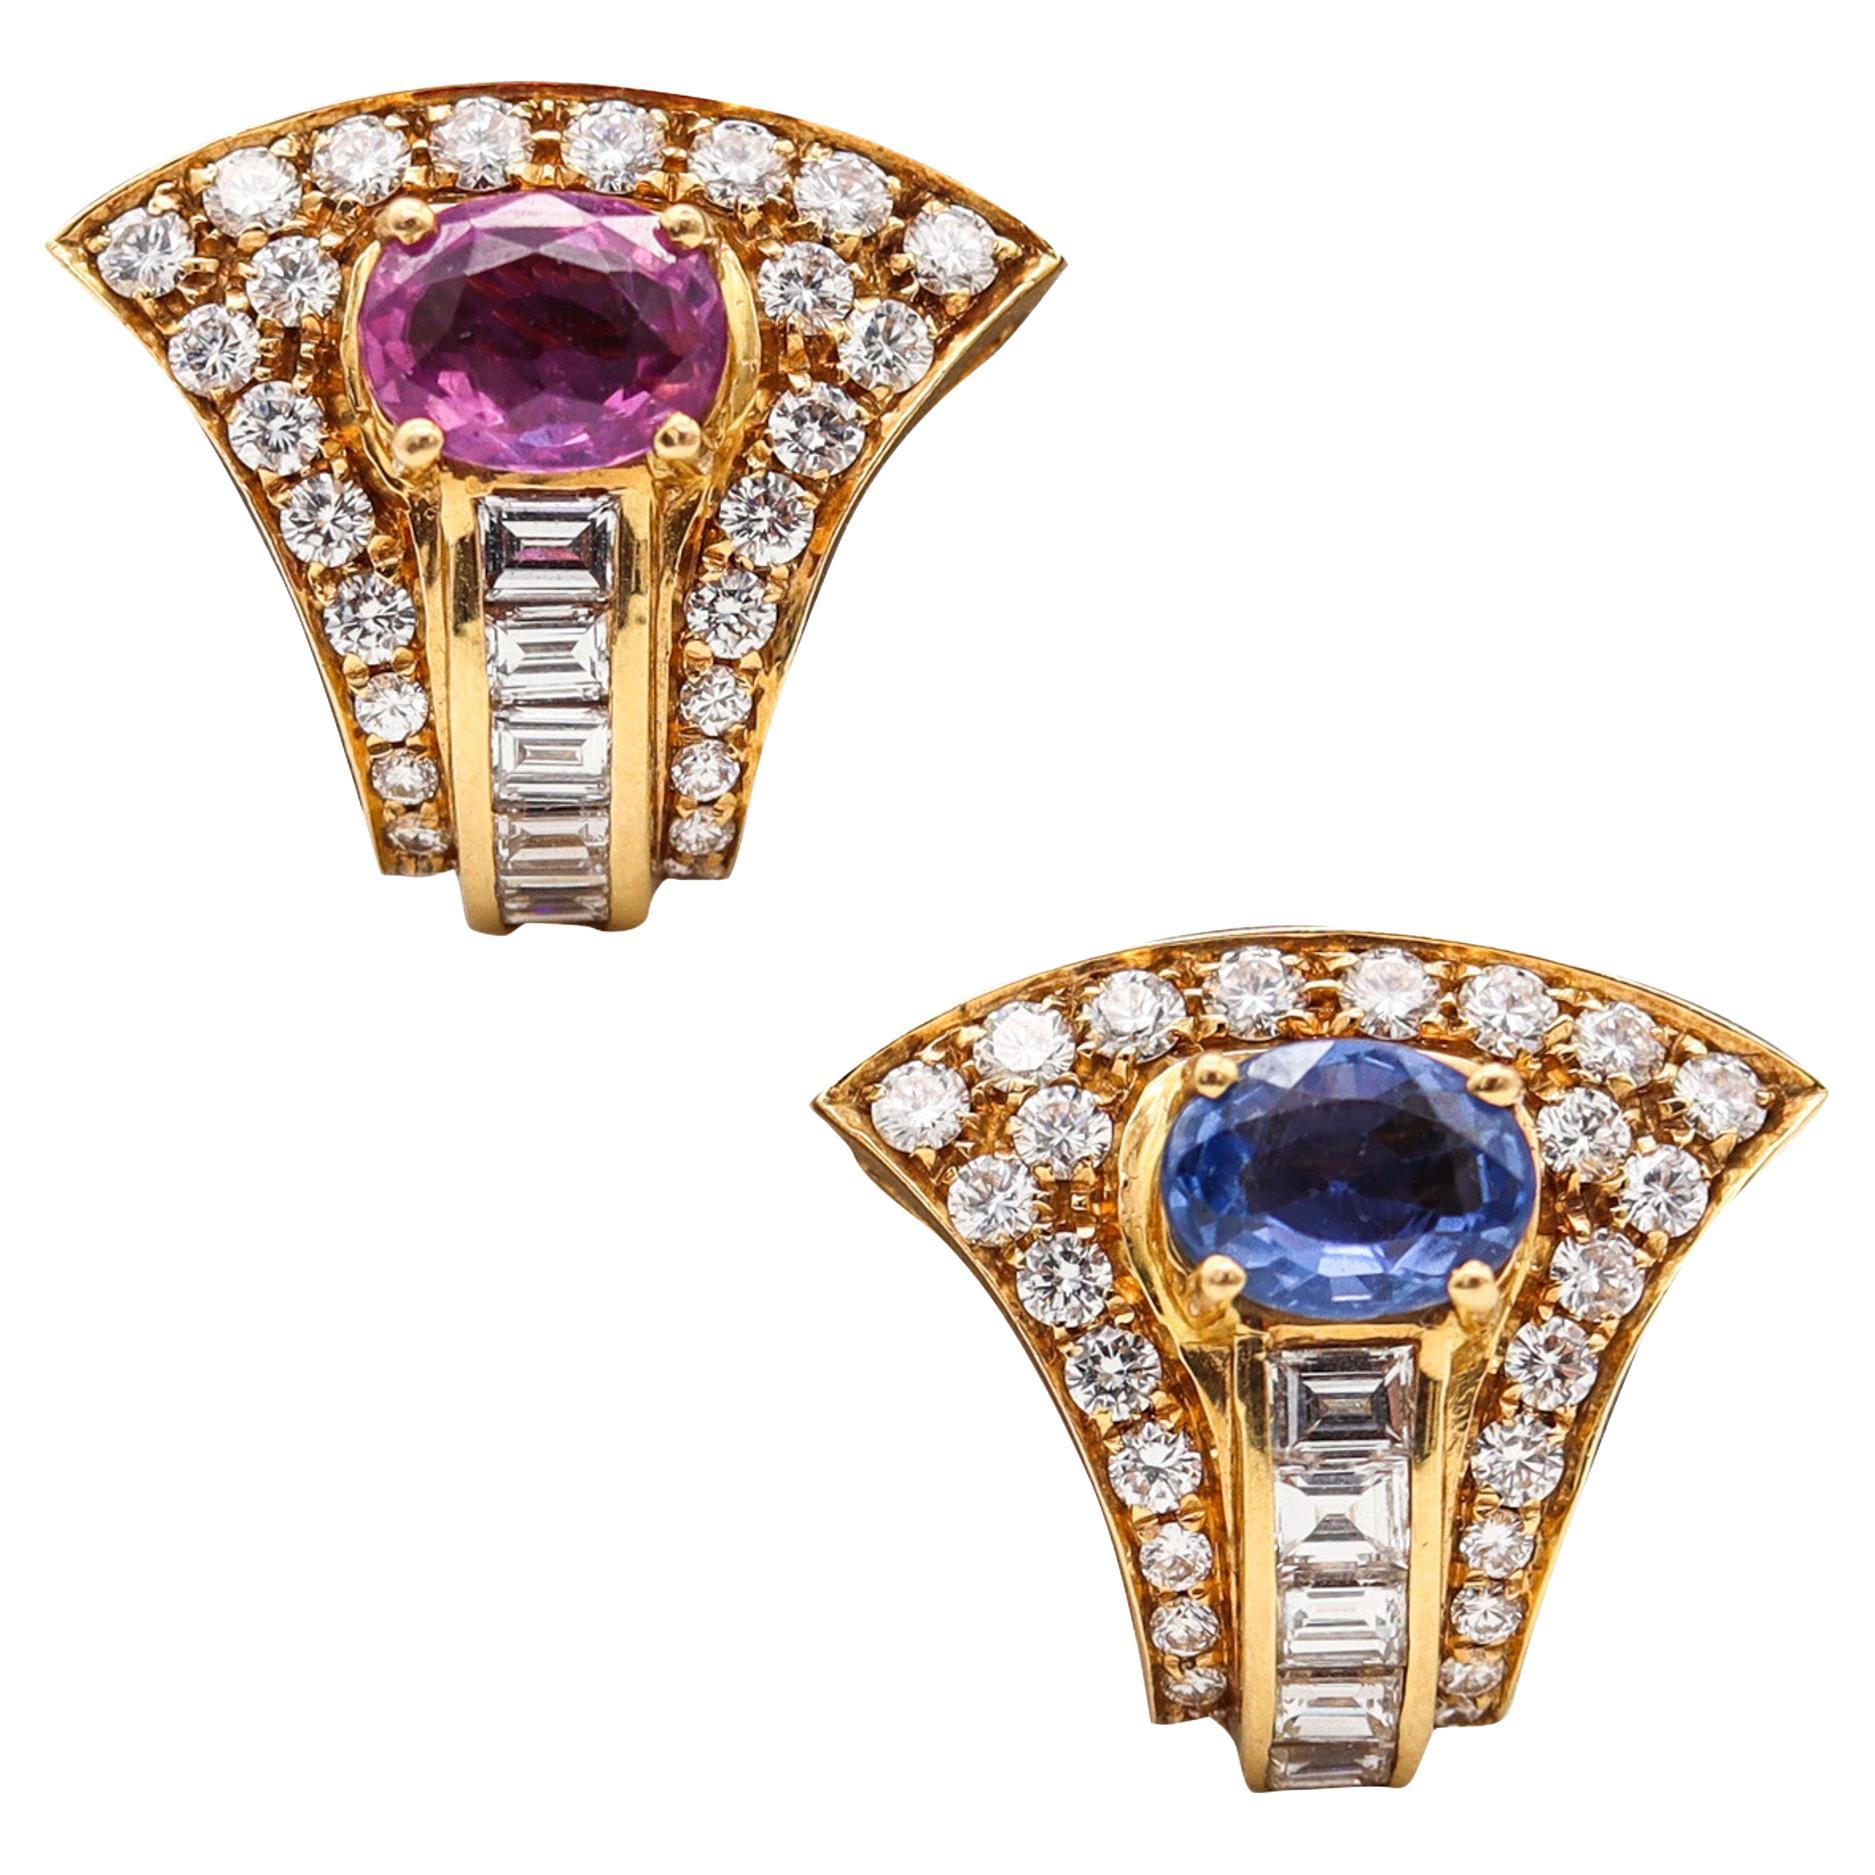 Bvlgari Clip On Earrings In 18Kt Yellow Gold With 8.93 Ctw Diamonds & Sapphires For Sale